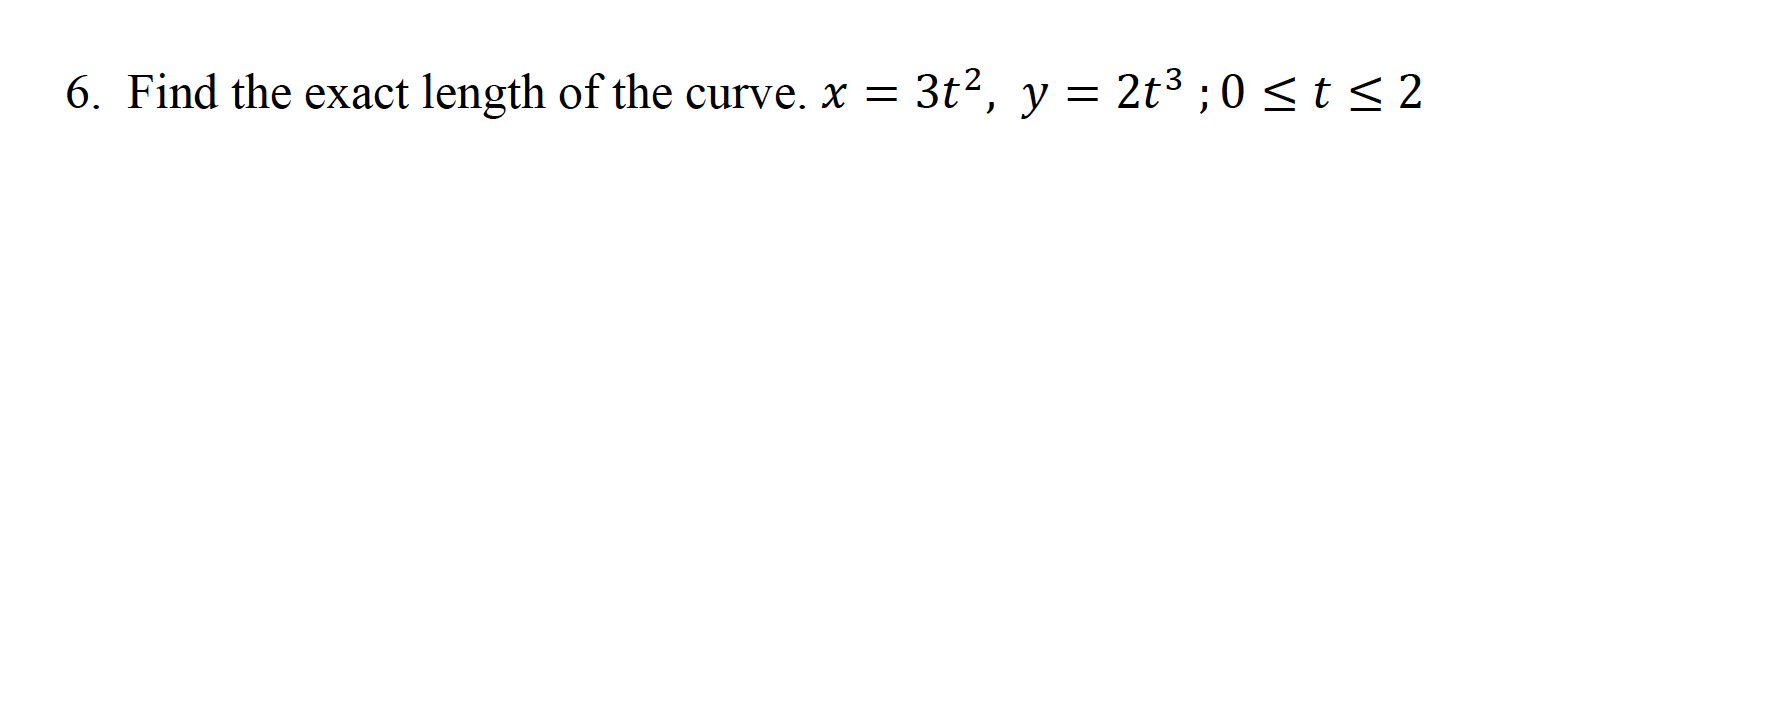 6. Find the exact length of the curve. x =
3t2, y = 2t3 ;0 <t < 2
